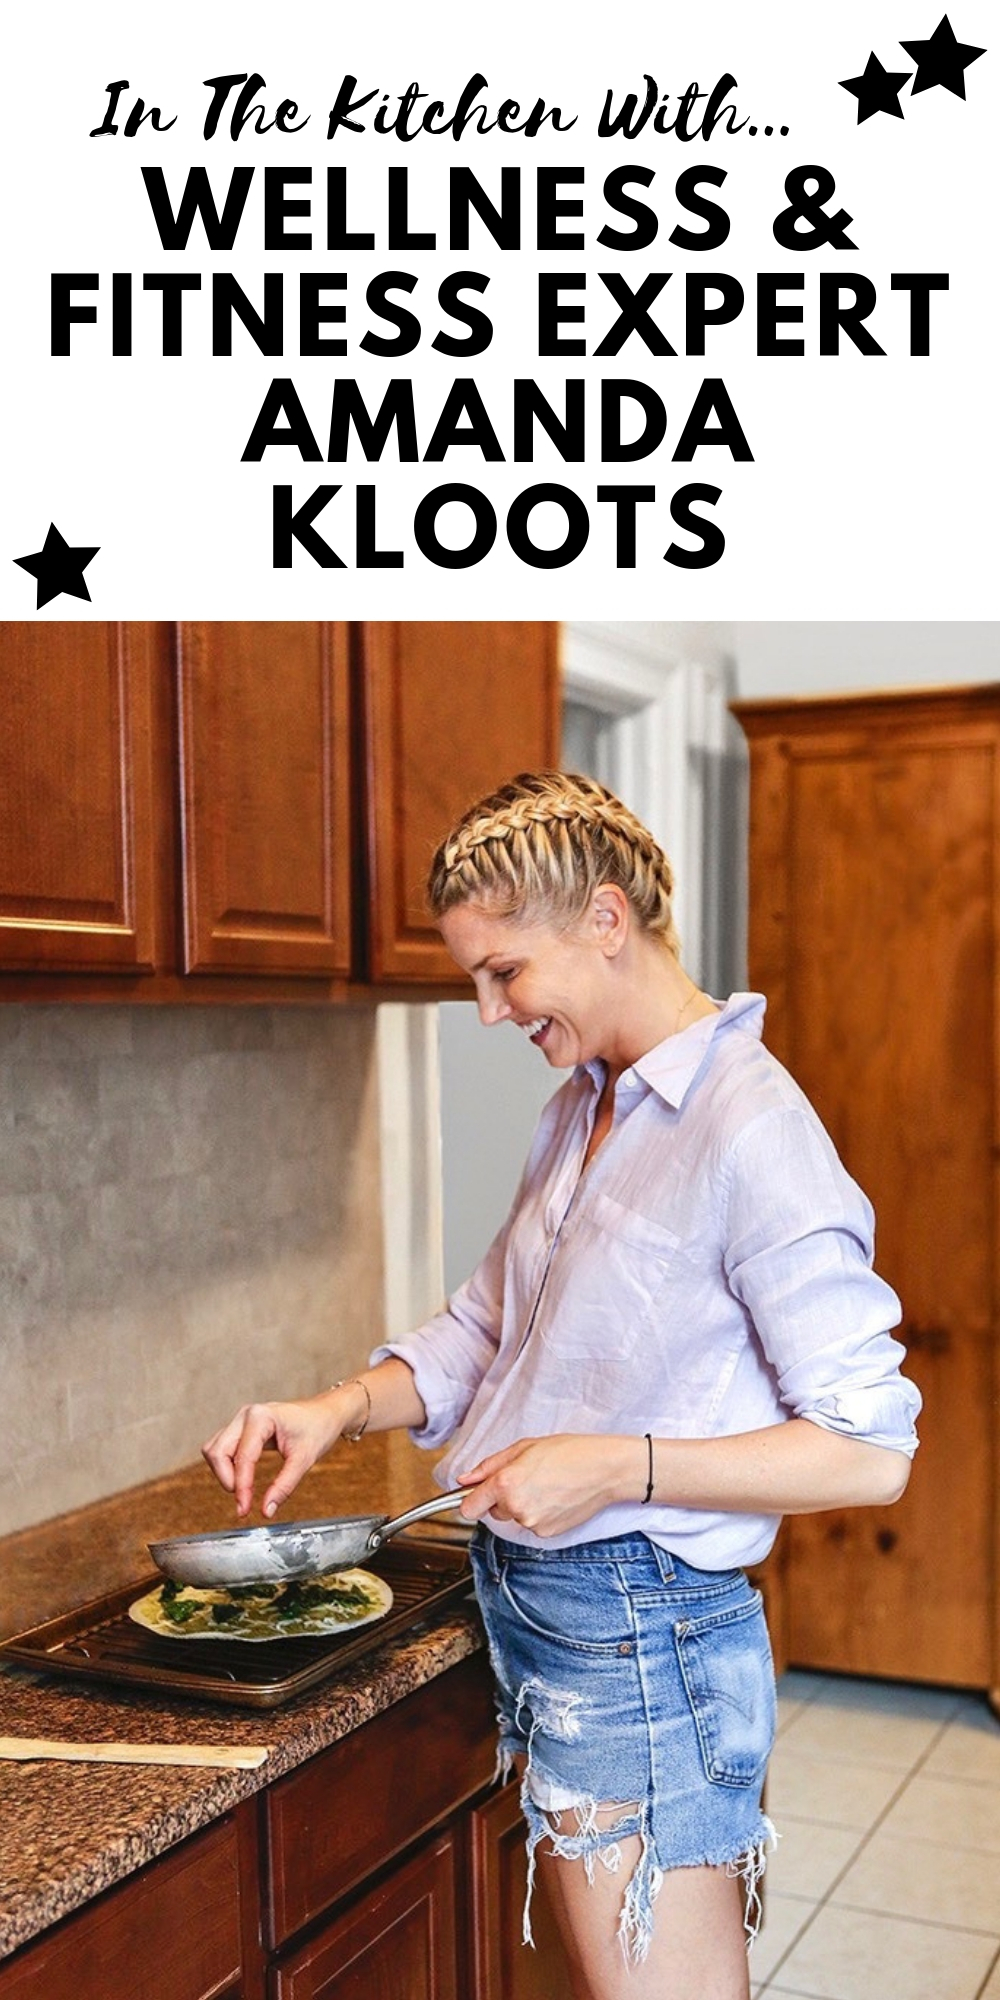 IN THE KITCHEN WITH WELLNESS & FITNESS EXPERT AMANDA KLOOTS